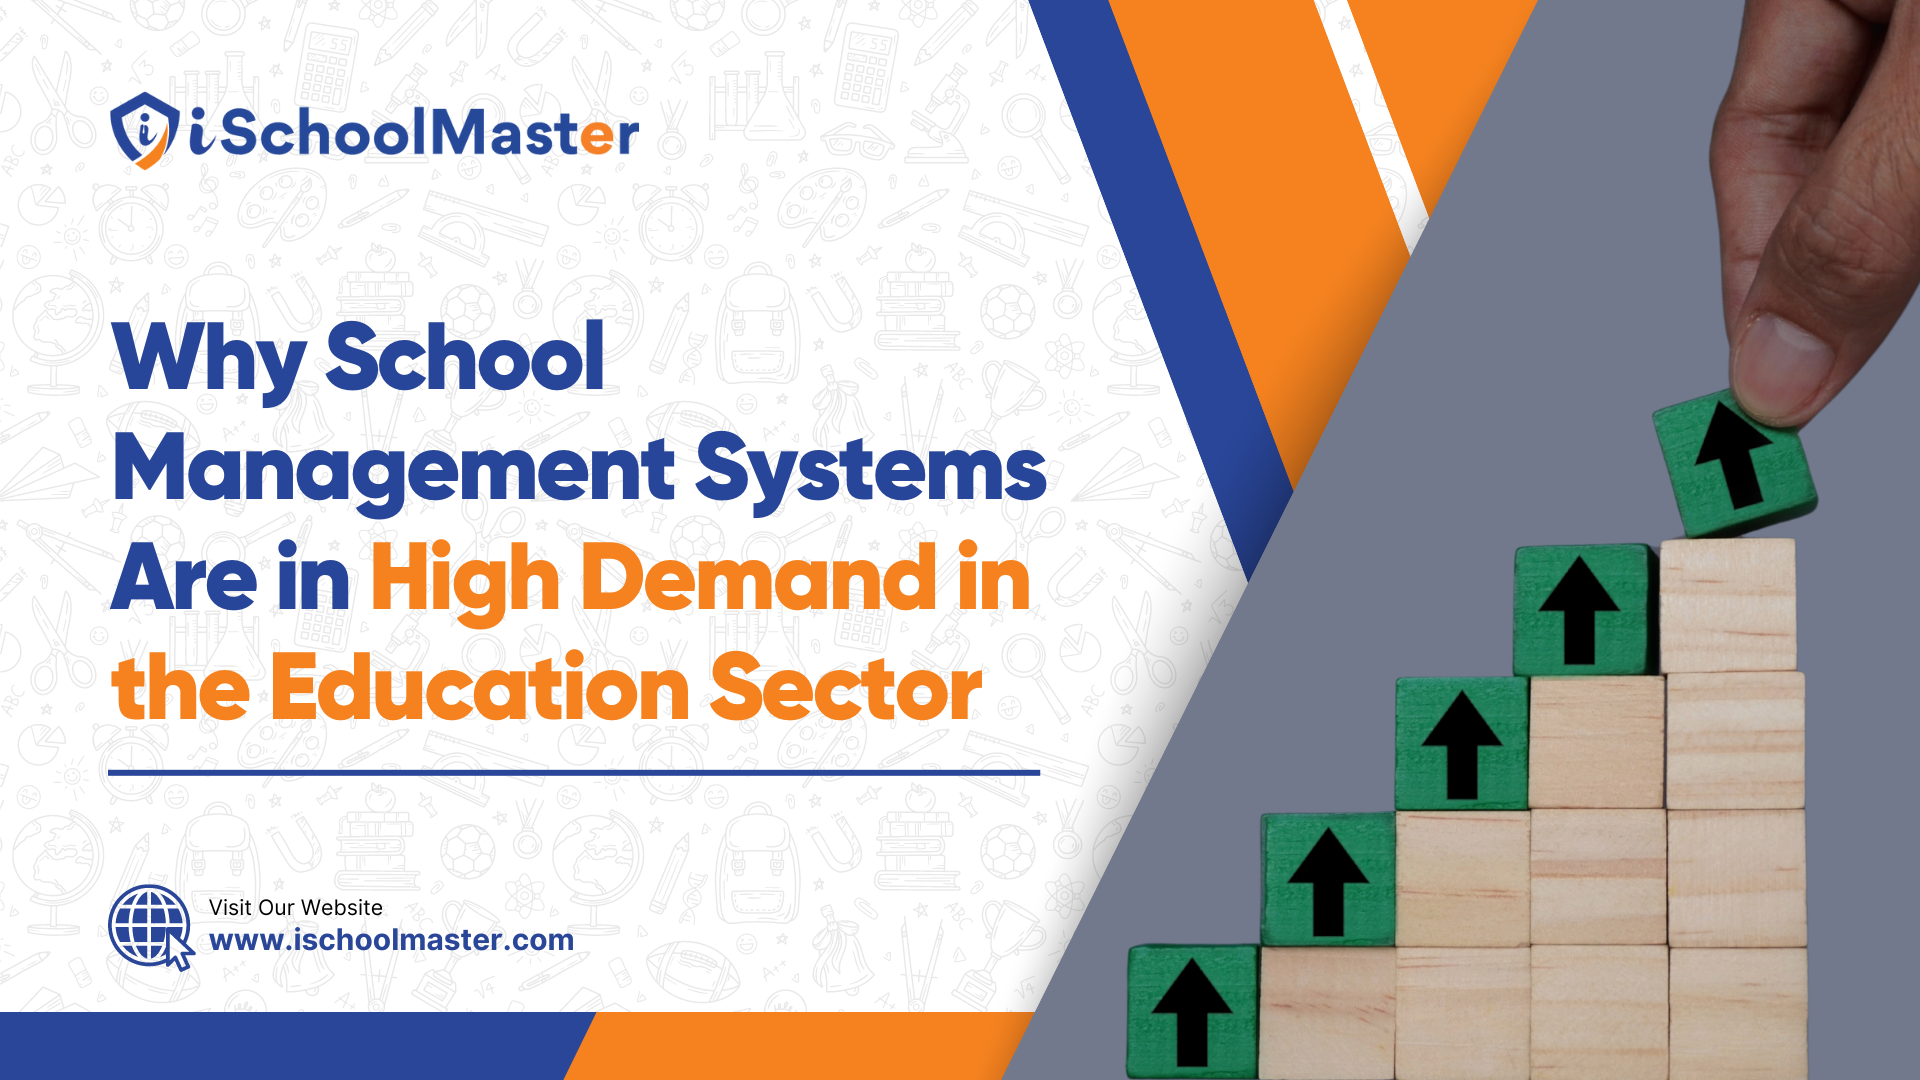 School Management Systems Are in High Demand in the Education Sector